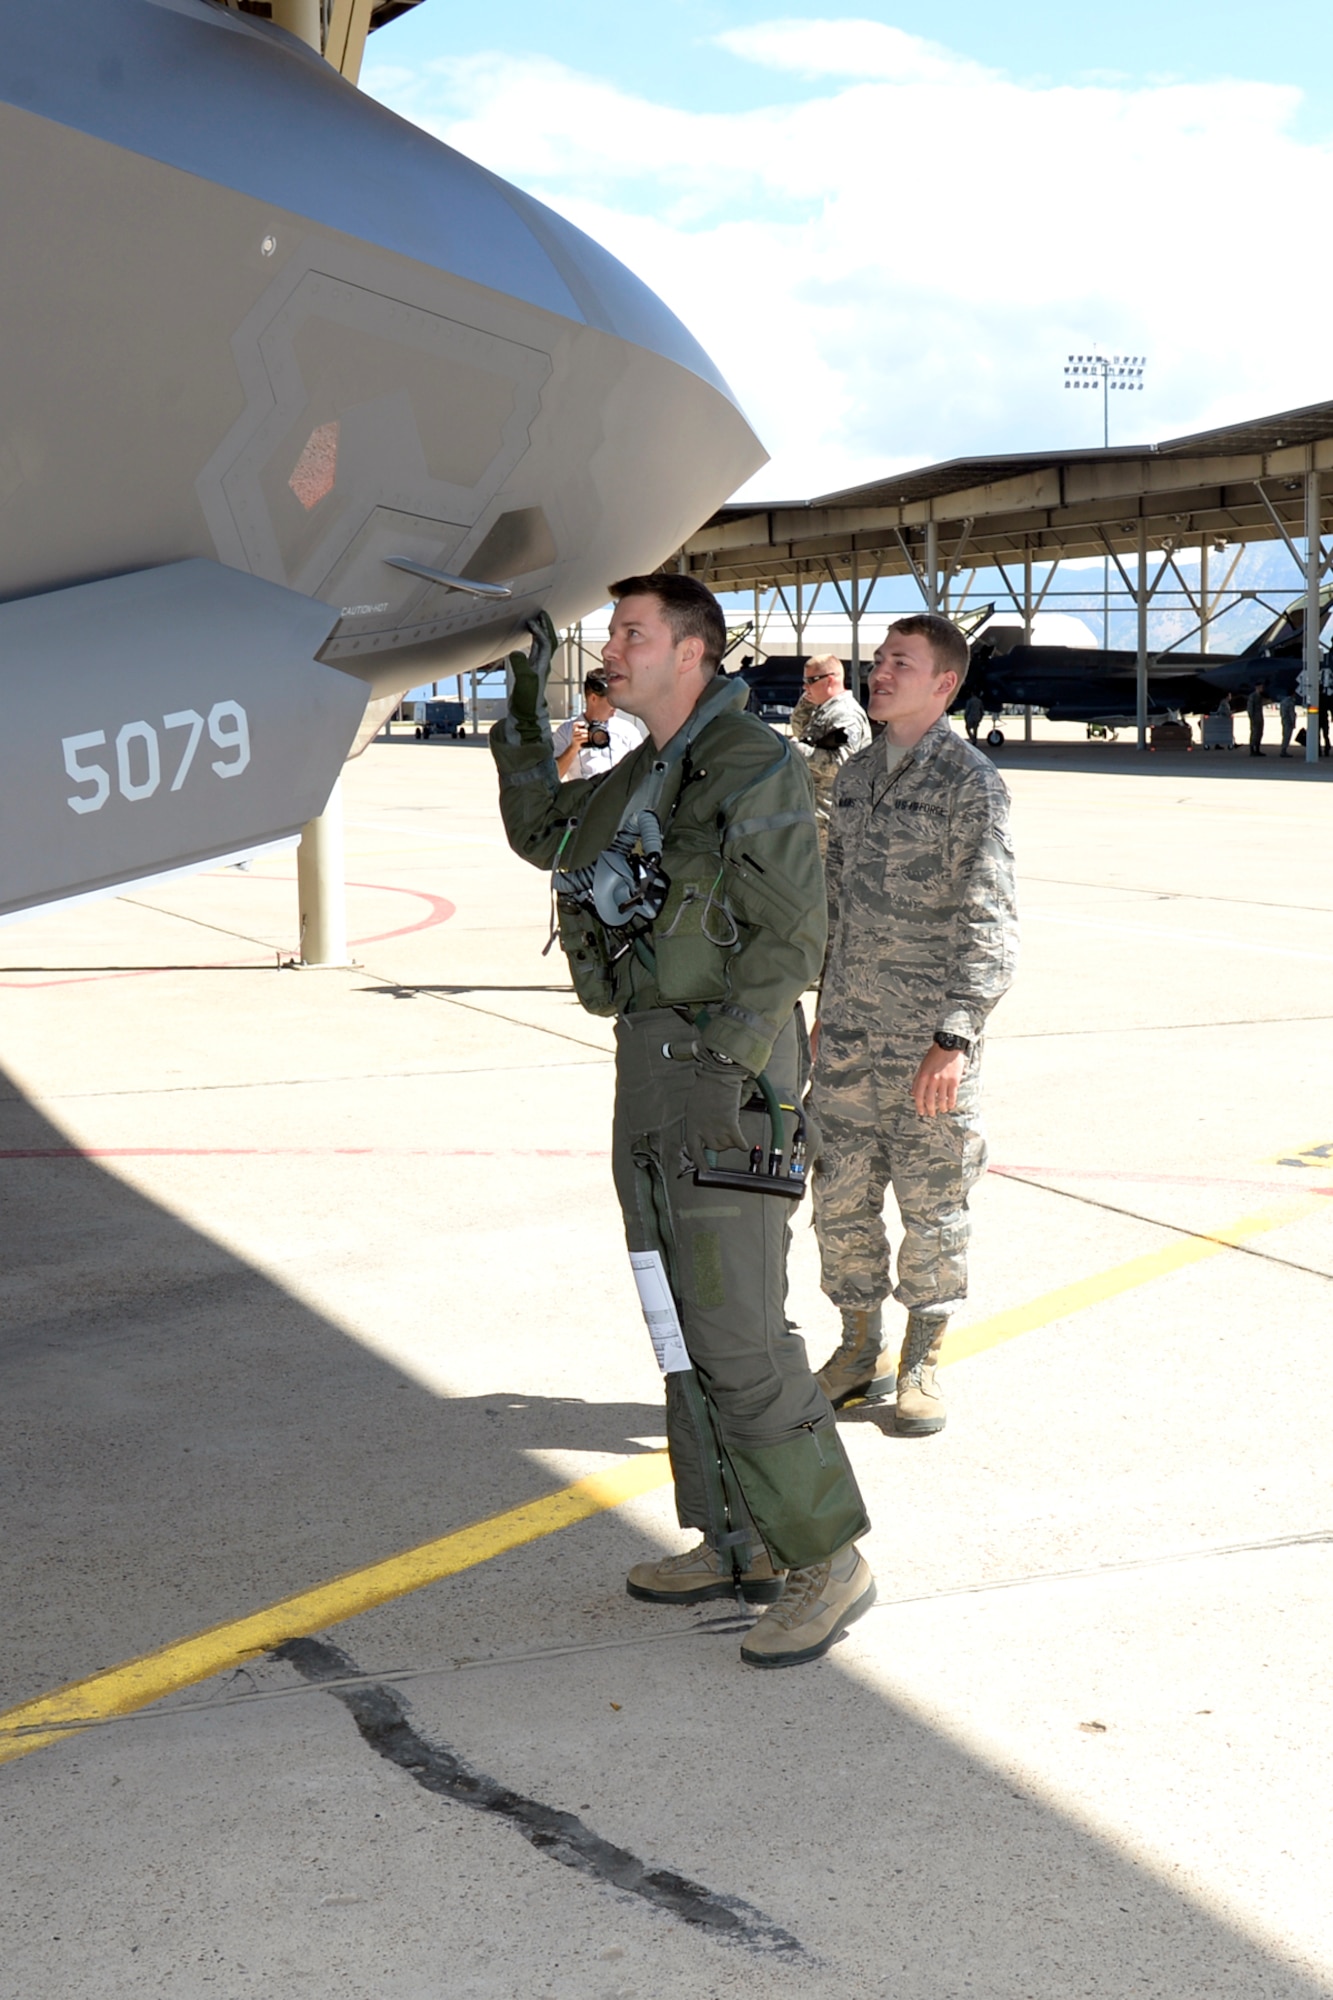 Lt. Col. Dave DeAngelis, an F-35 Lightning II pilot assigned to the 419th Operations Group, and Airman 1st Class Michael Wilkins, a crew chief assigned to the 34th Aircraft Maintenance Unit,  prepare for flight May 22 at Hill Air Force Base, Utah. The flight in aircraft 5079 was the 3,000th operational F-35 sortie flown at Hill. (U.S. Air Force/Todd Cromar)